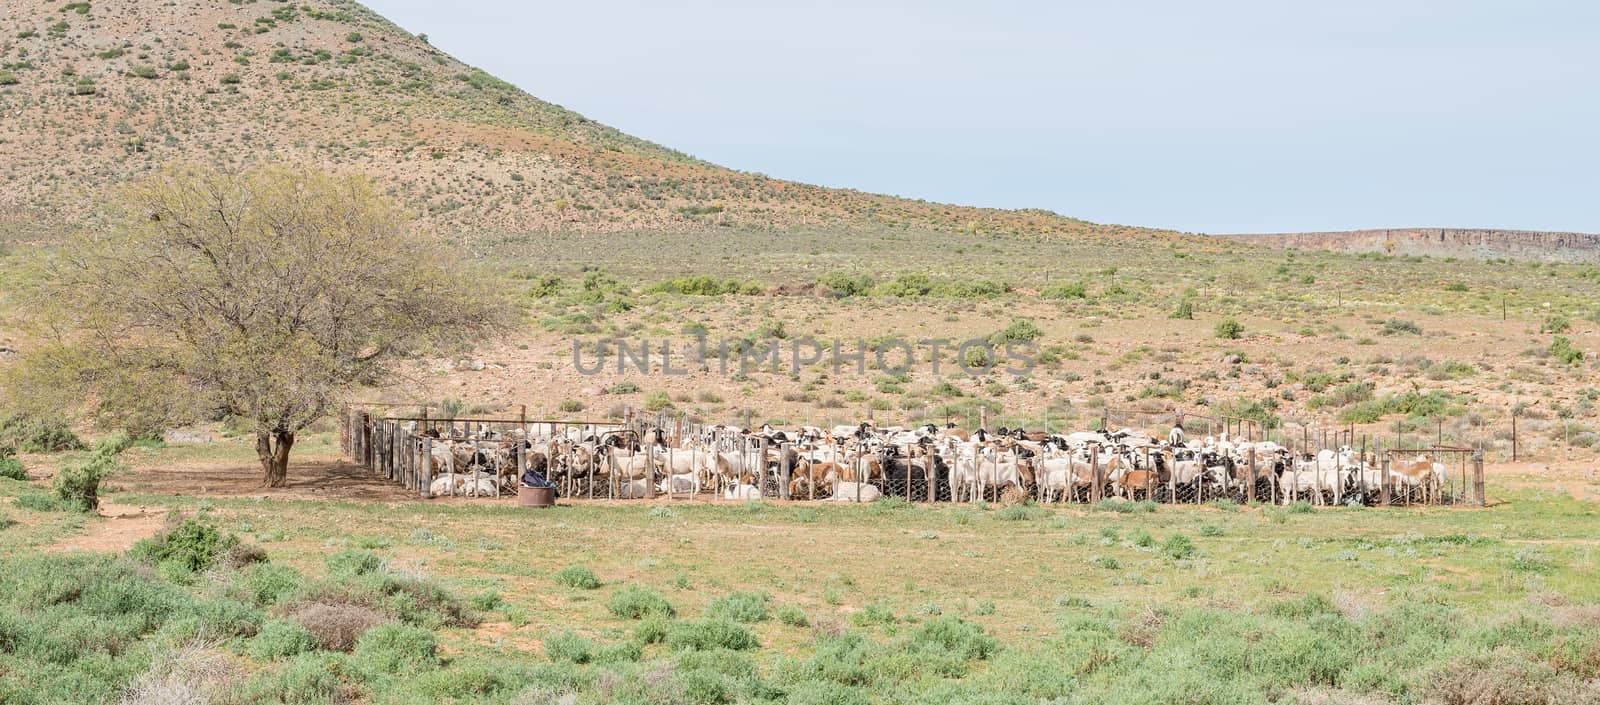 Dorper sheep in a kraal on a farm between Loeriesfontein and Nieuwoudtville